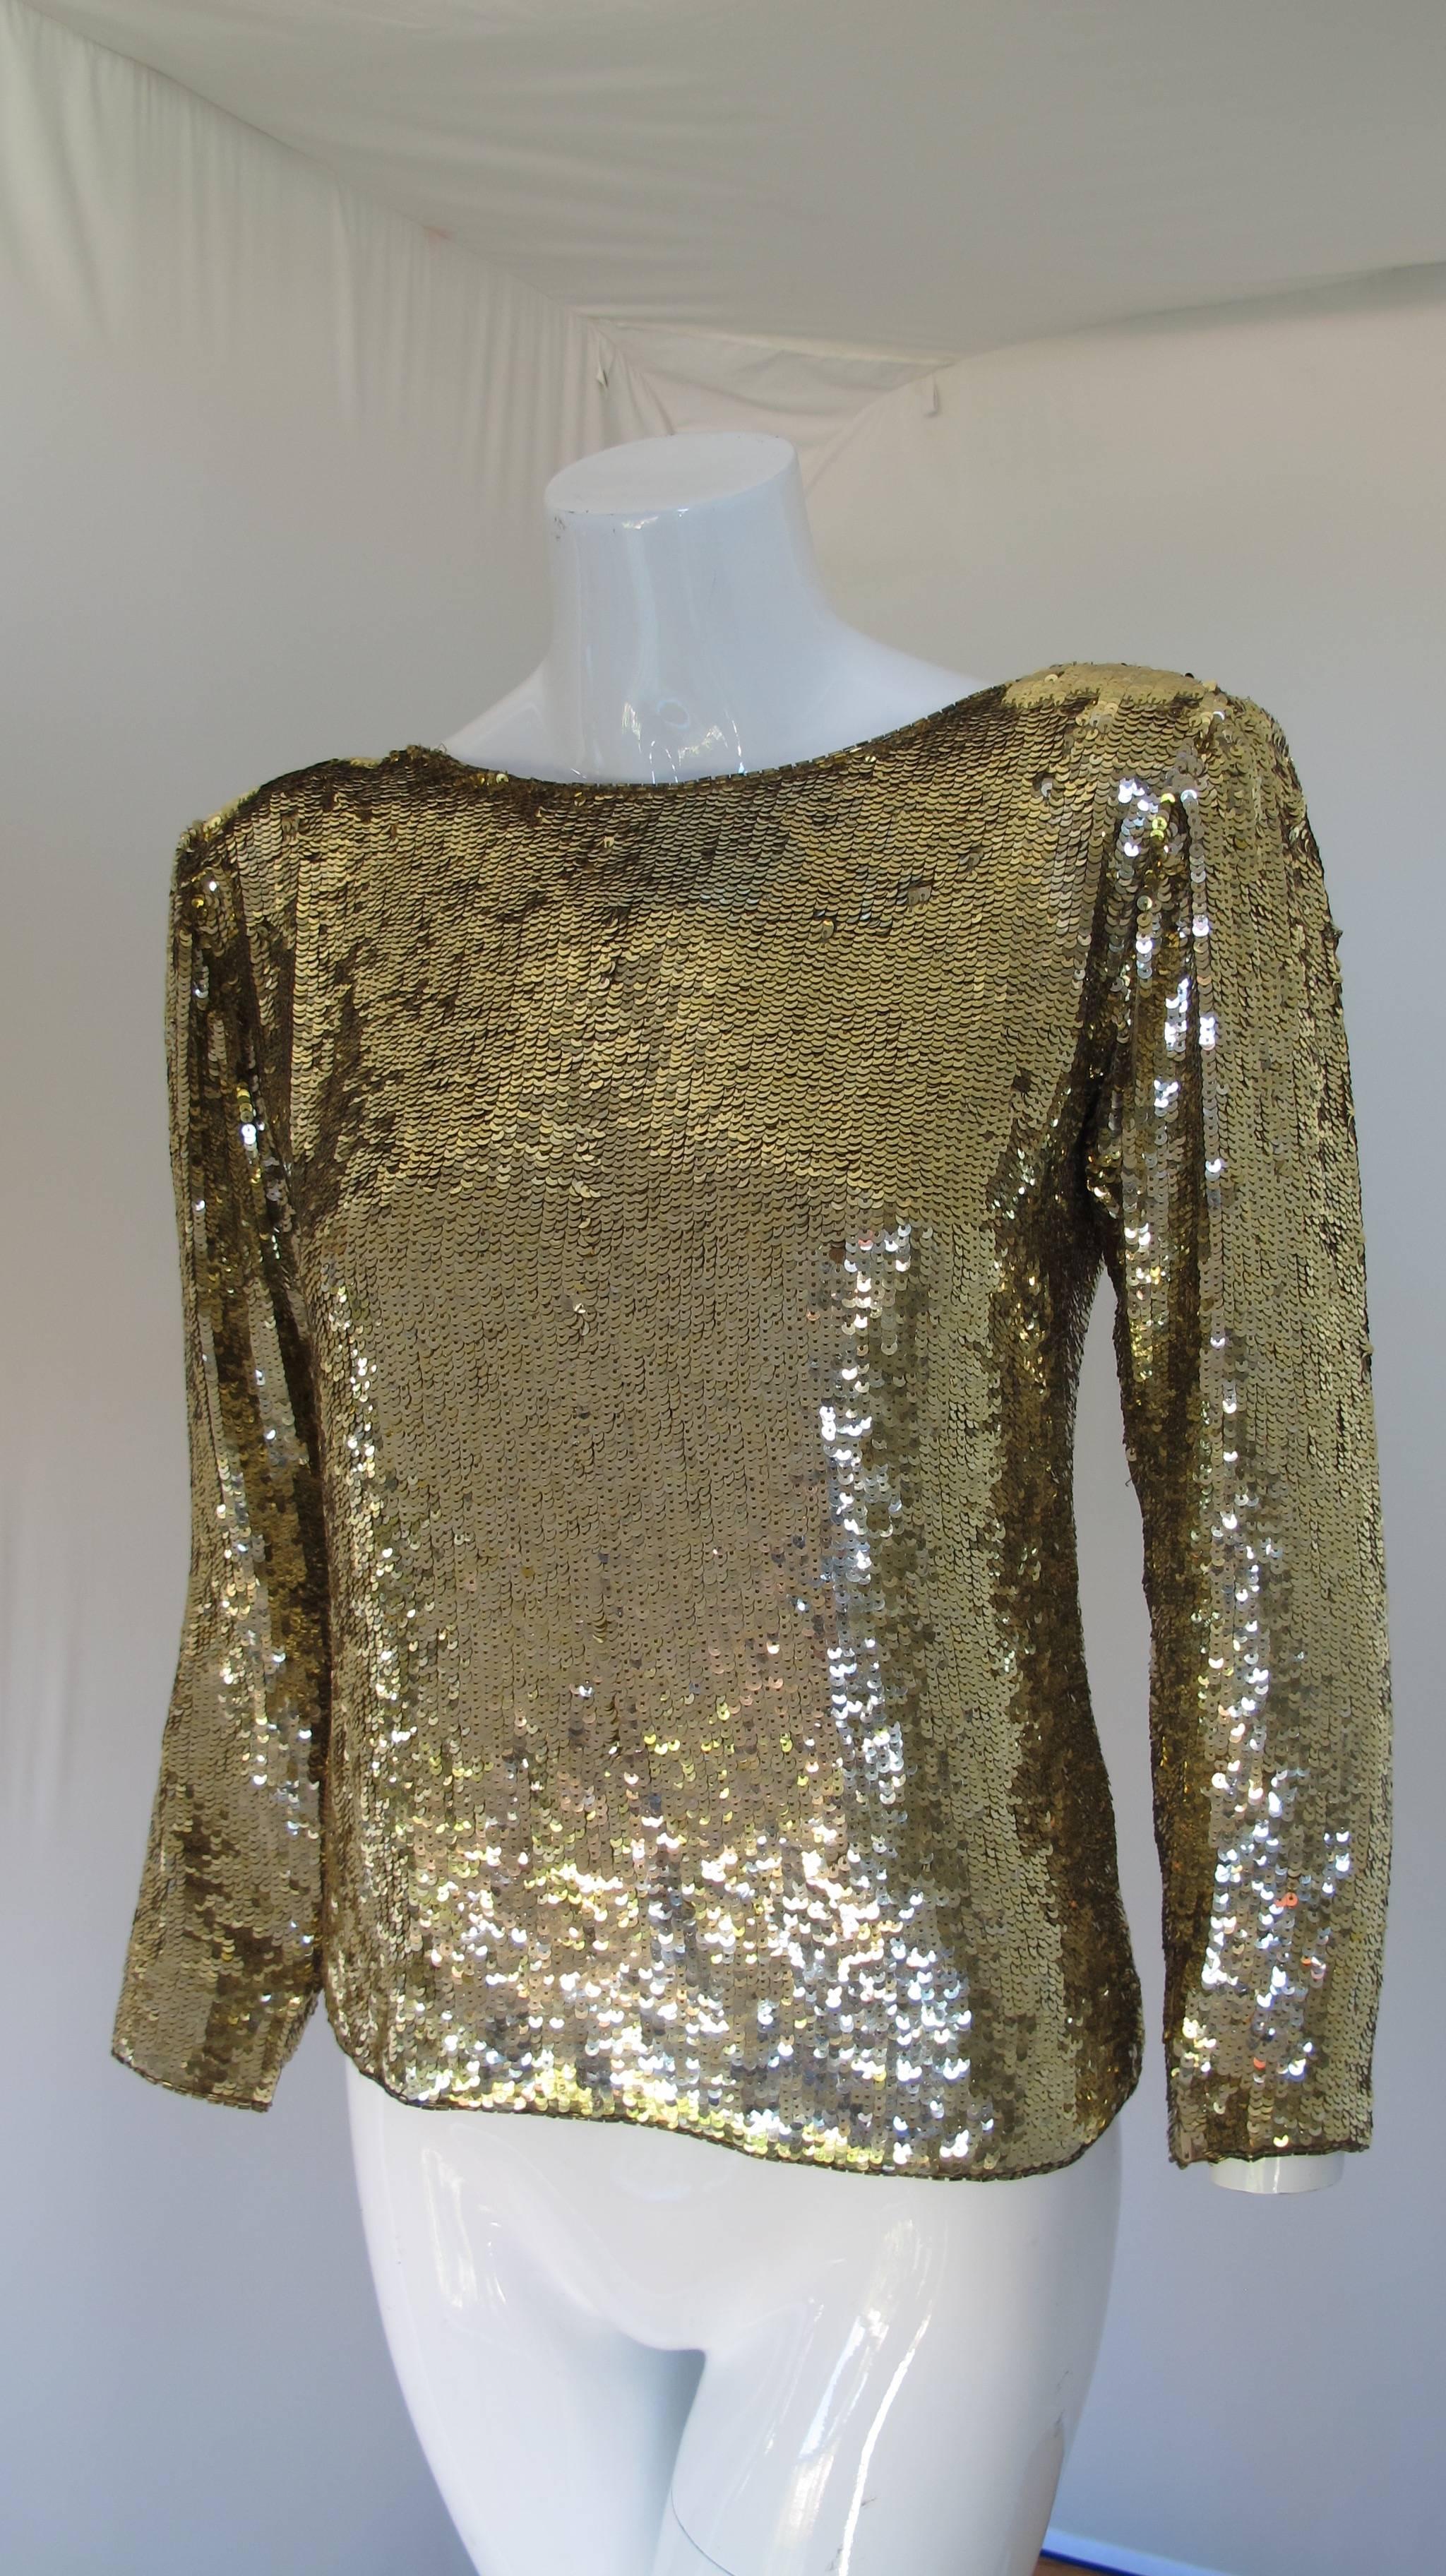 Yves Saint Laurent gold sequin blouse with a deep V-neck at the back and oversized buttons with rhinestones. The top neckline is embellished with gold bugle beads. Most likely dating from the late 1970's. Fully lined in silk, size tag S. In very